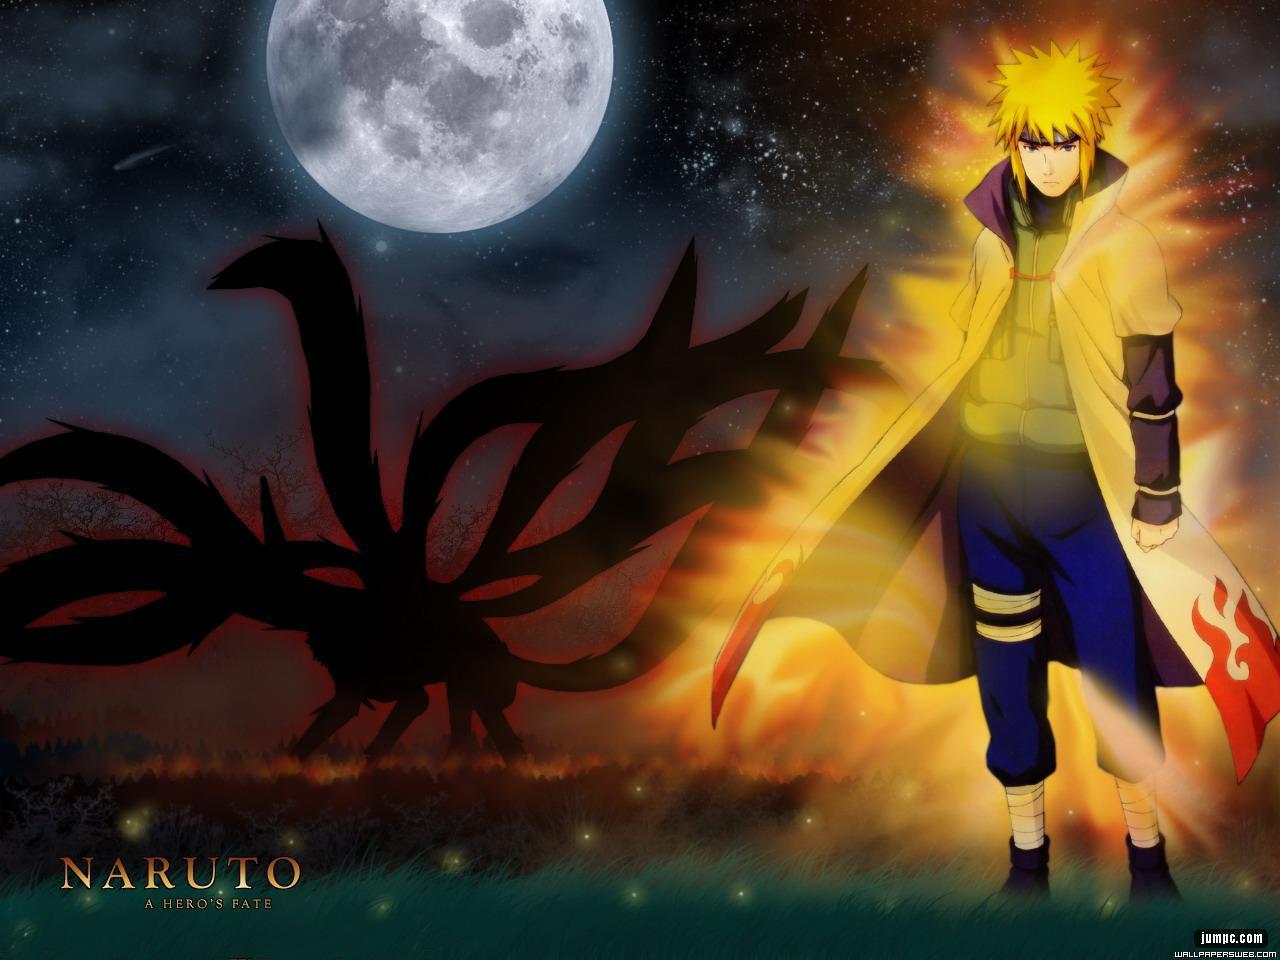 Cool Naruto Wallpapers 16210 HD Desktop Backgrounds and Widescreen